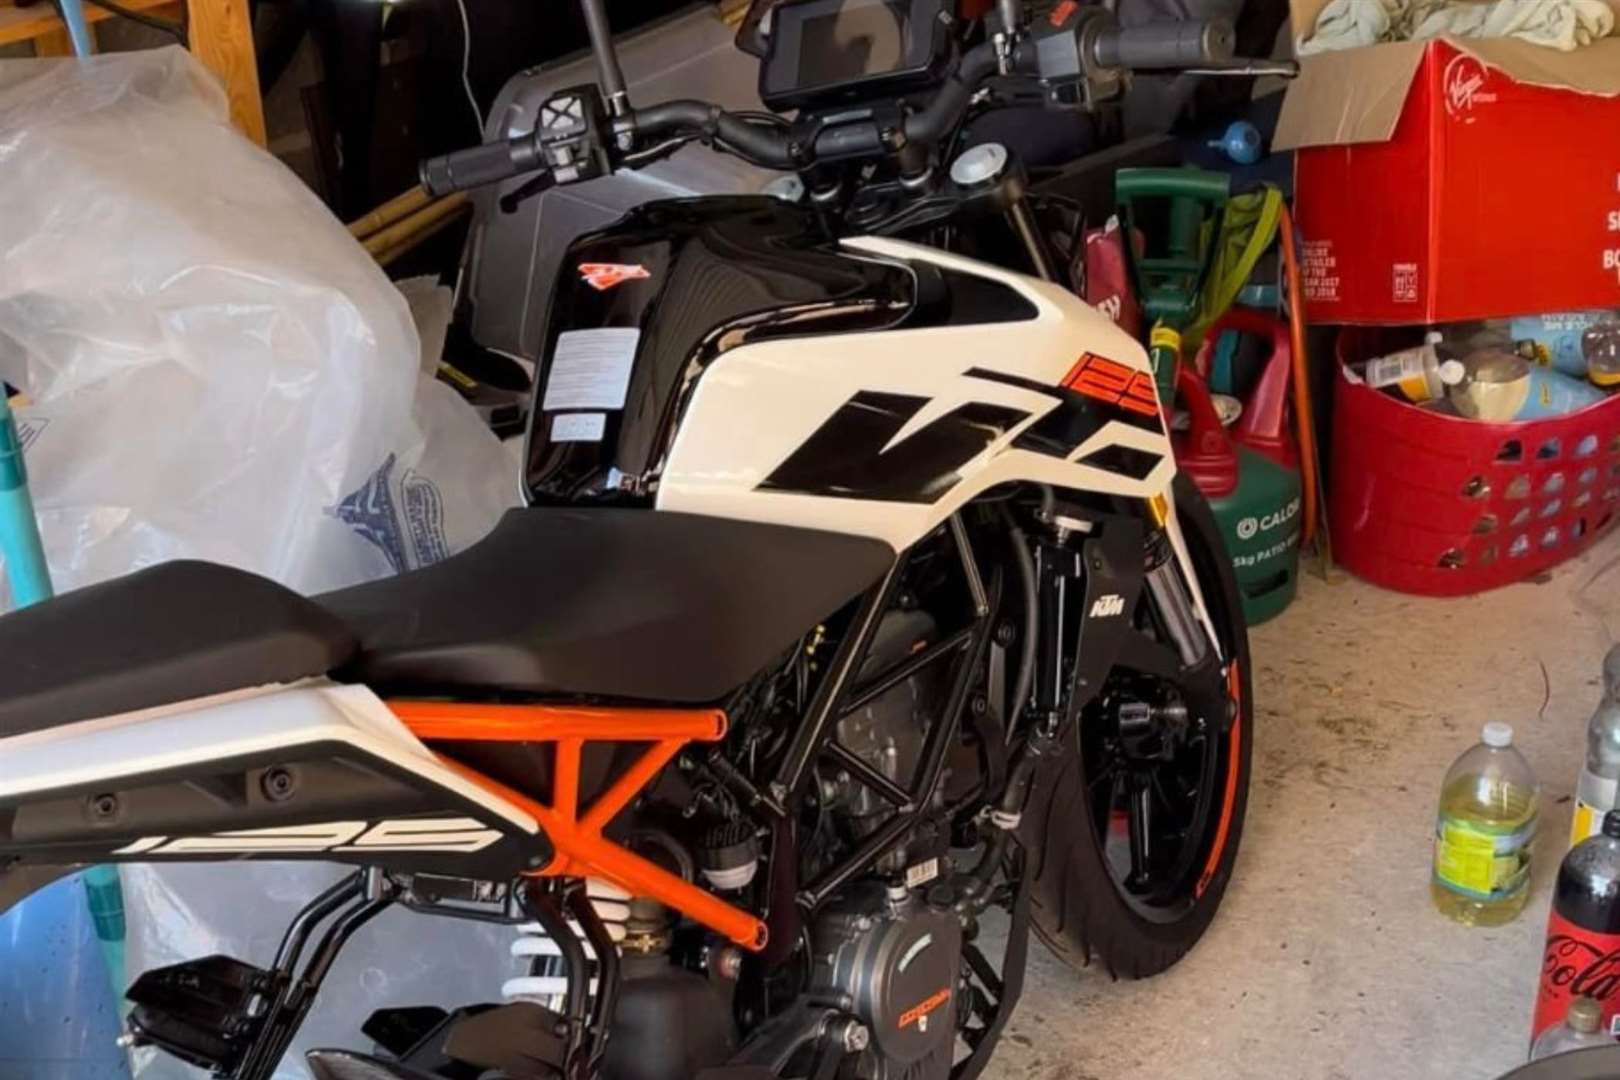 A motorbike was stolen from the Medway City Estate in a matter of seconds